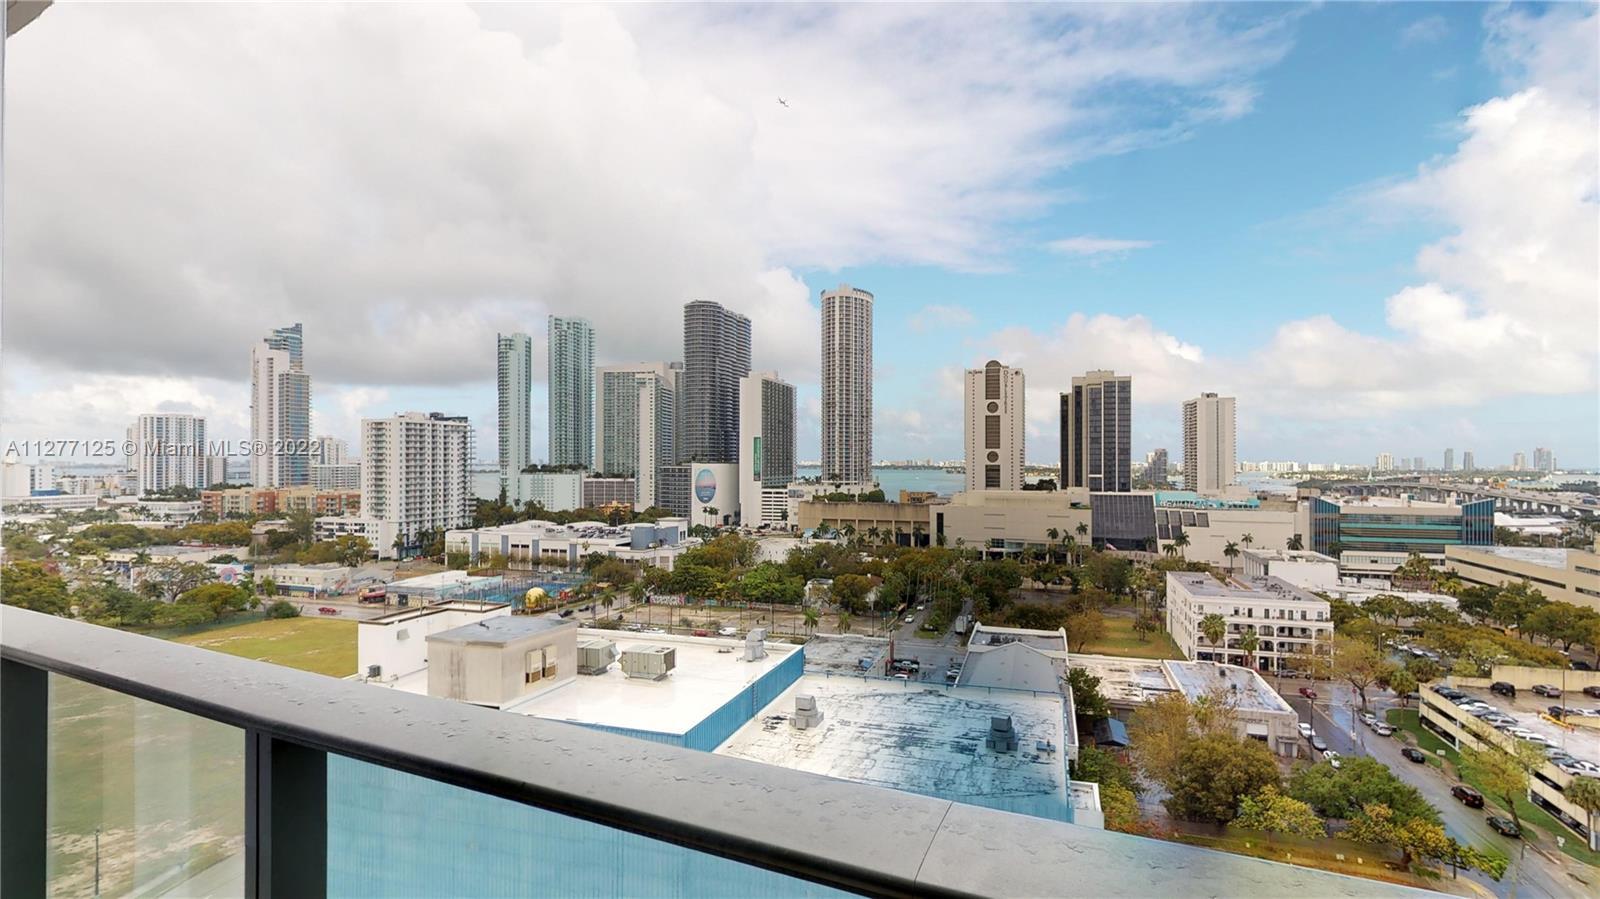 Breathtaking views from this spacious studio with Easterly exposure overlooking the Port of Miami an